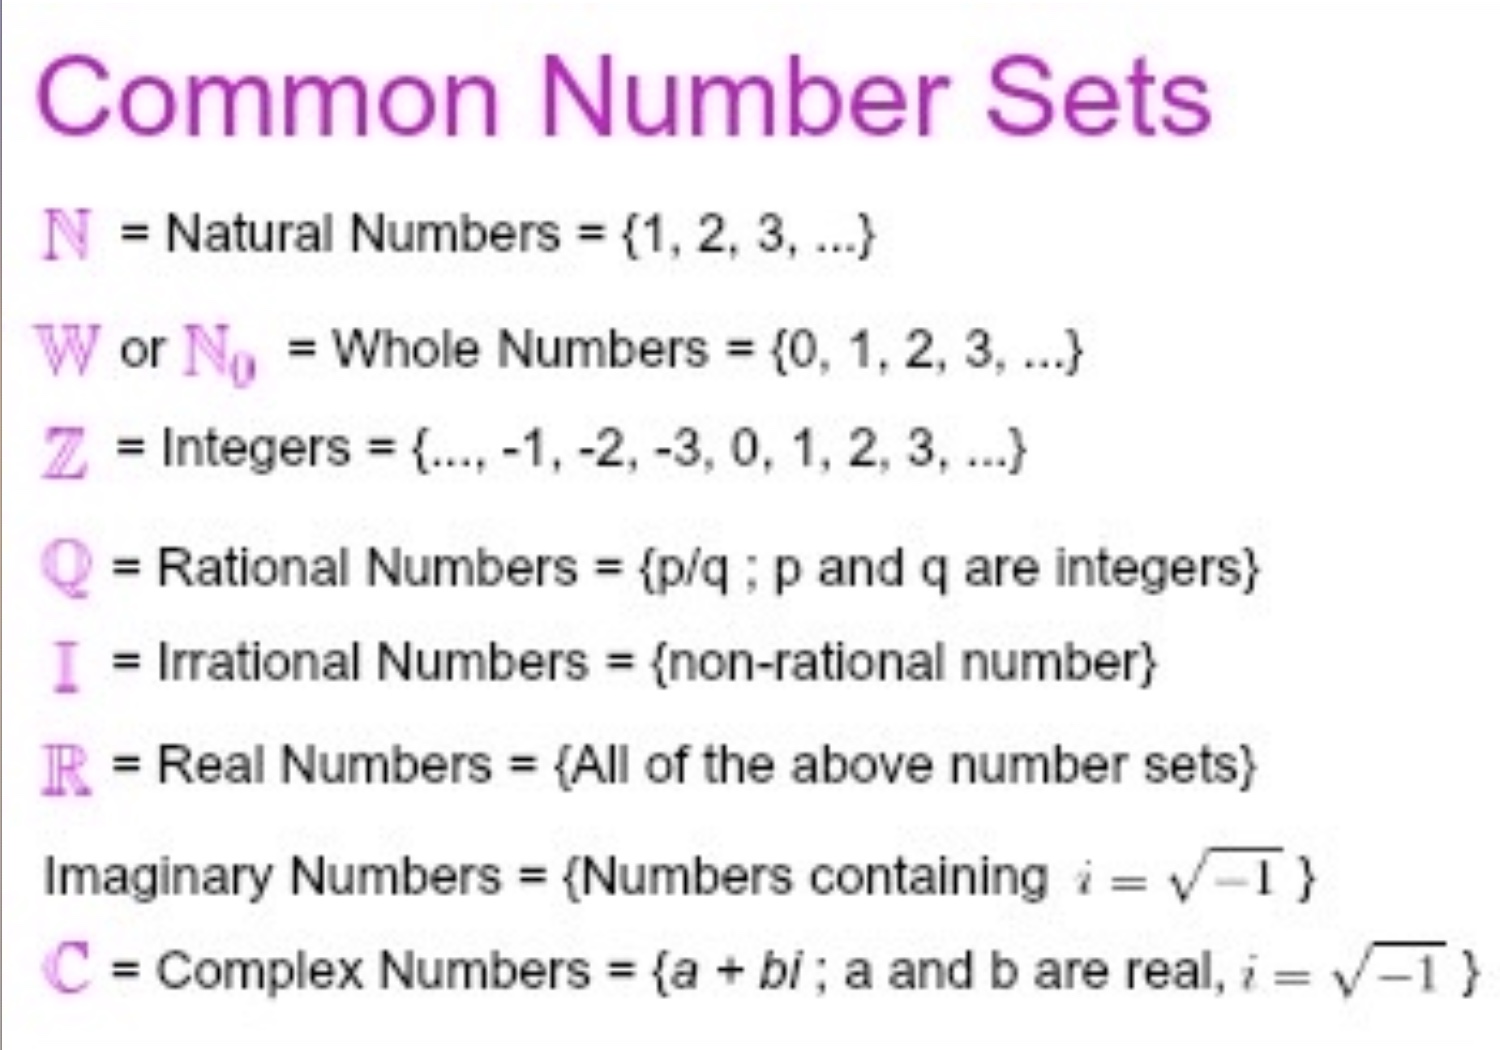 <p>whole numbers and their opposites, negative and positive wholes (ex. -2, -1, 0, 1, 2..)</p>